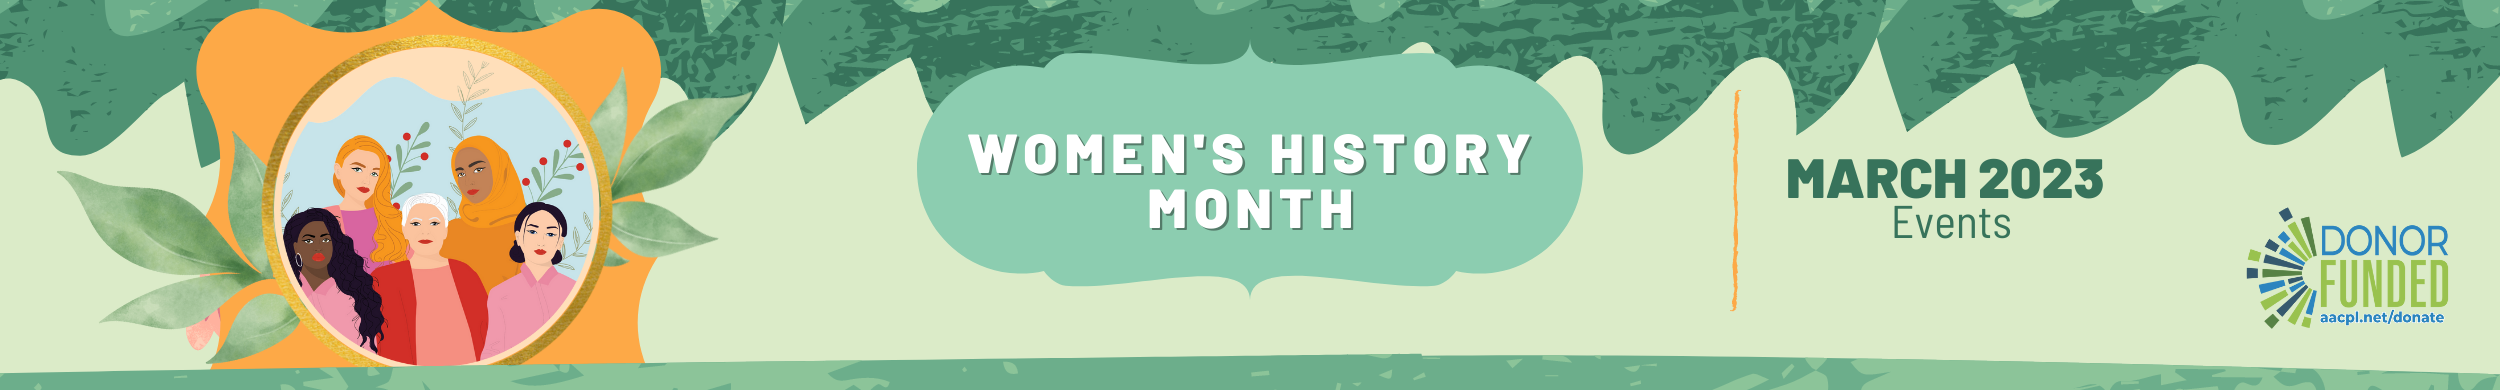 Women's History Month Events